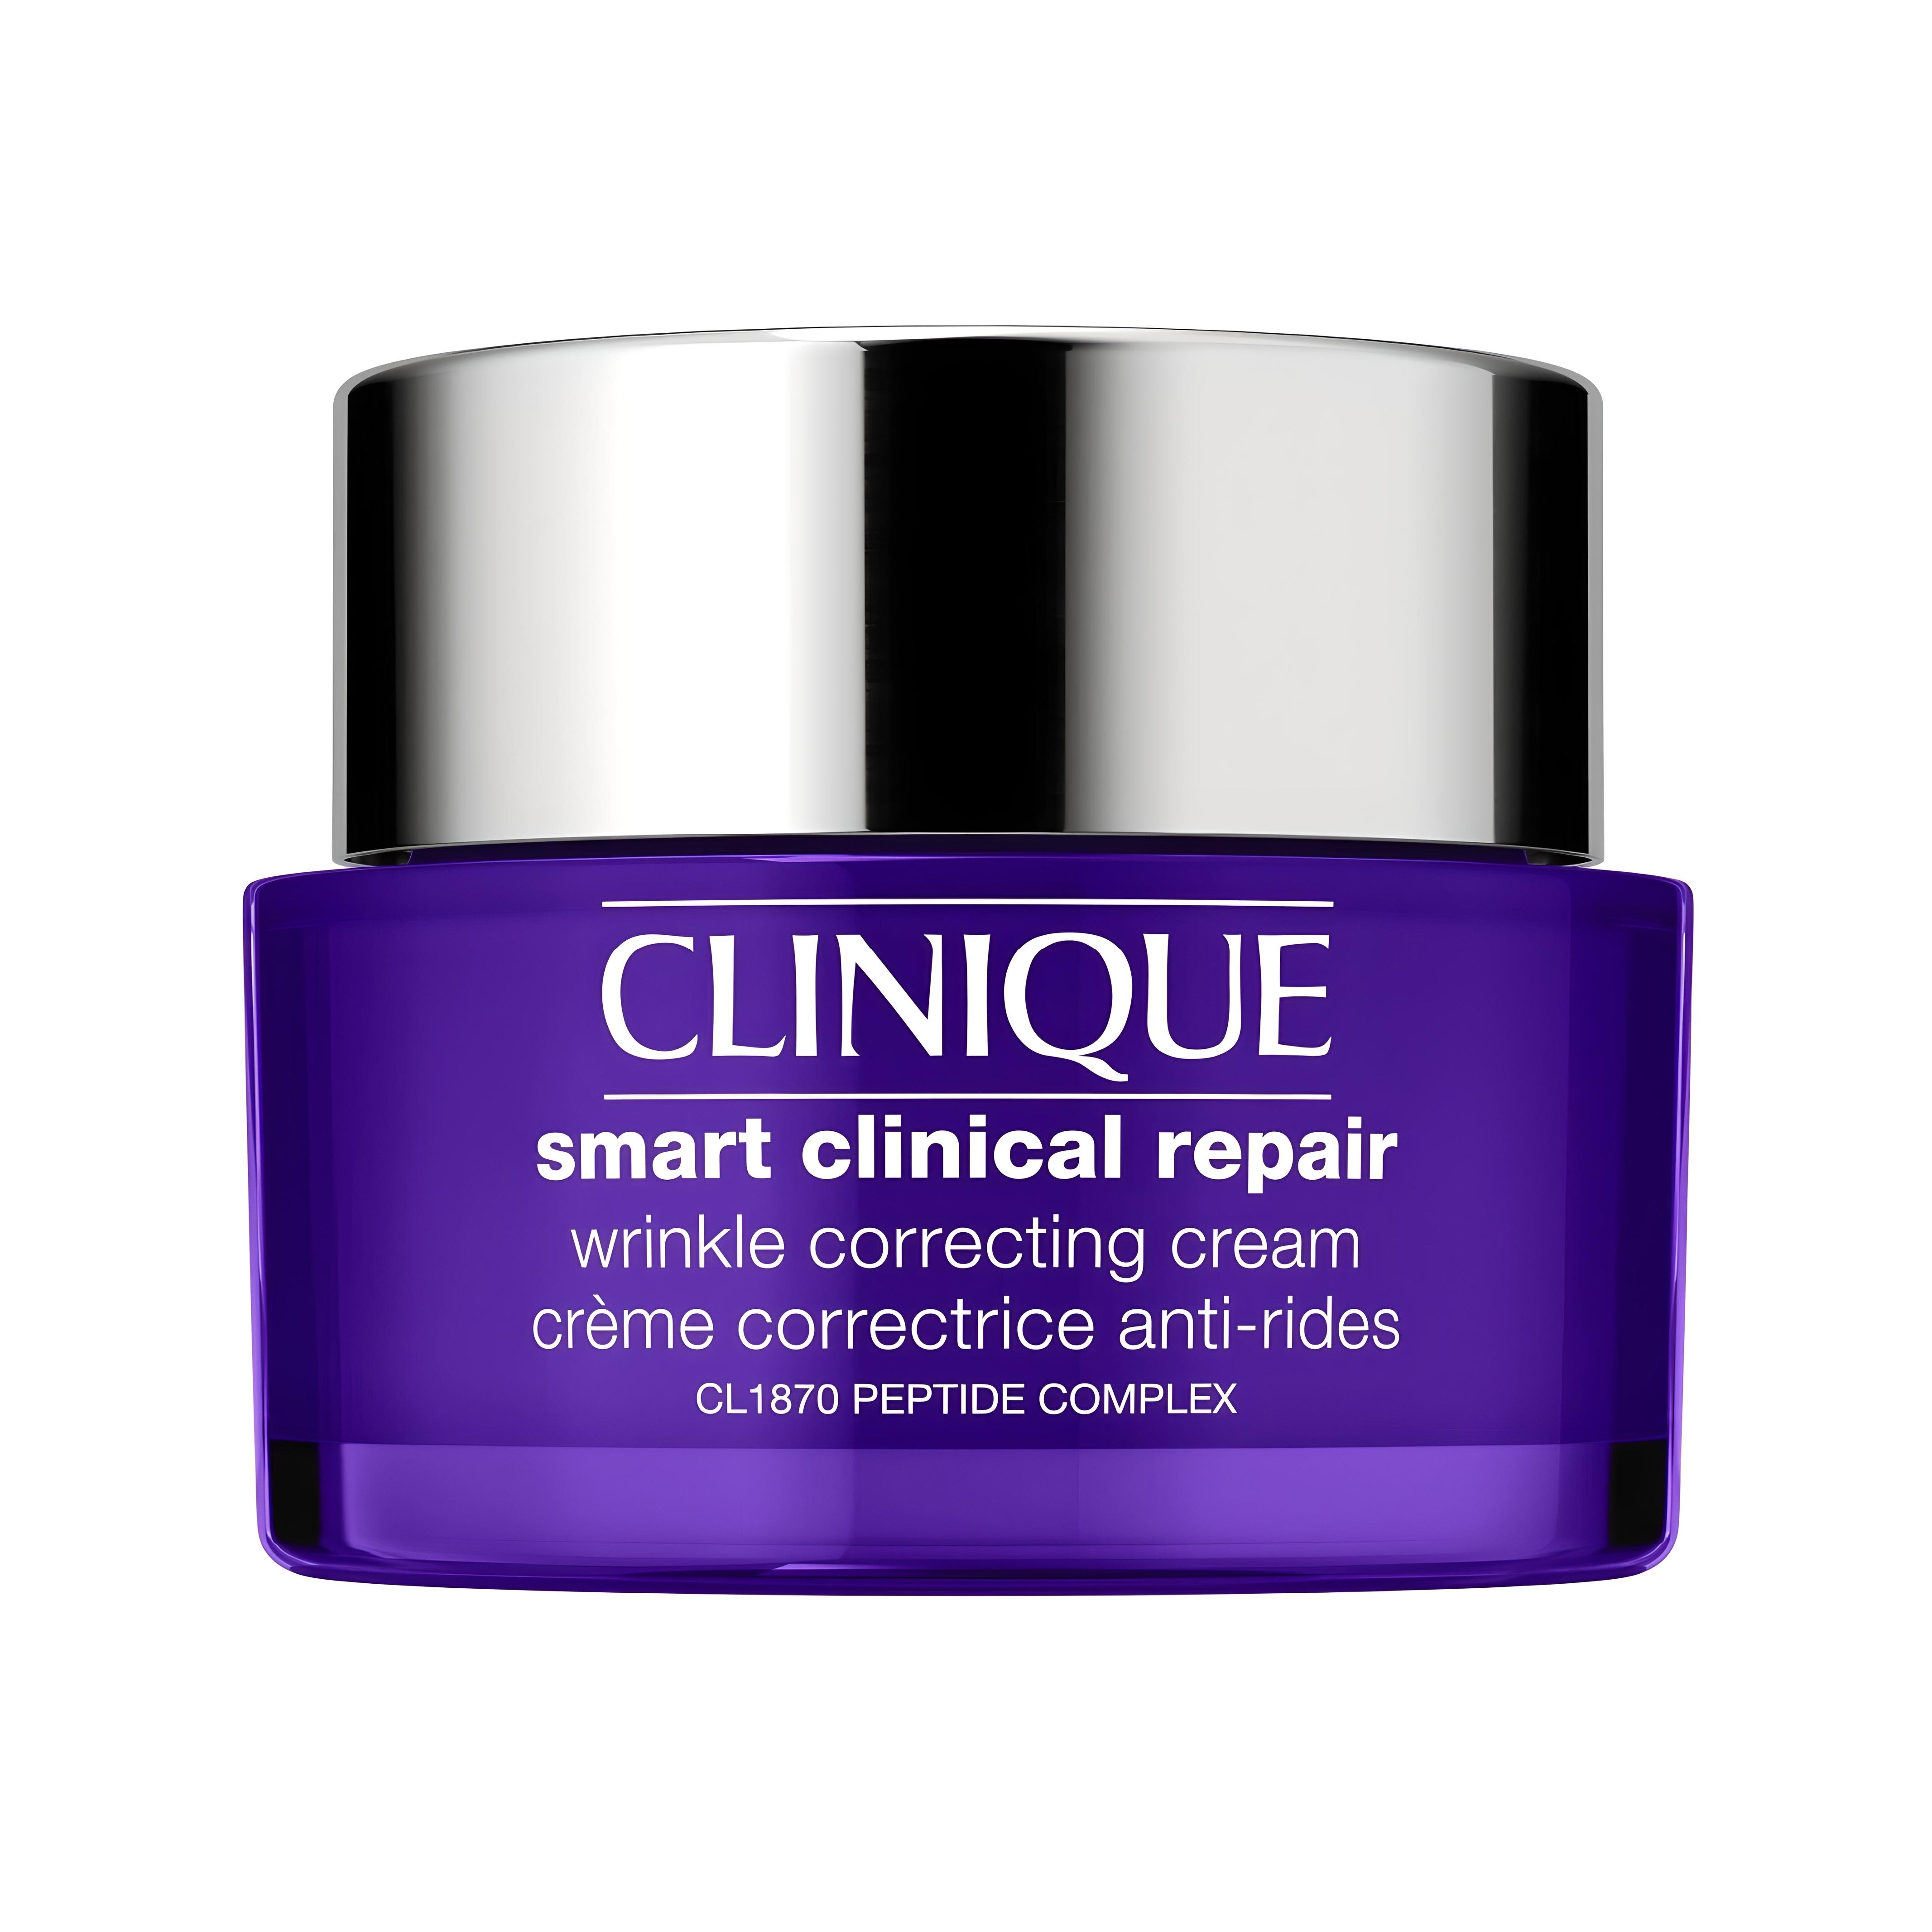 SMART CLINICAL wrinkle correcting cream Gesichtspflege CLINIQUE   